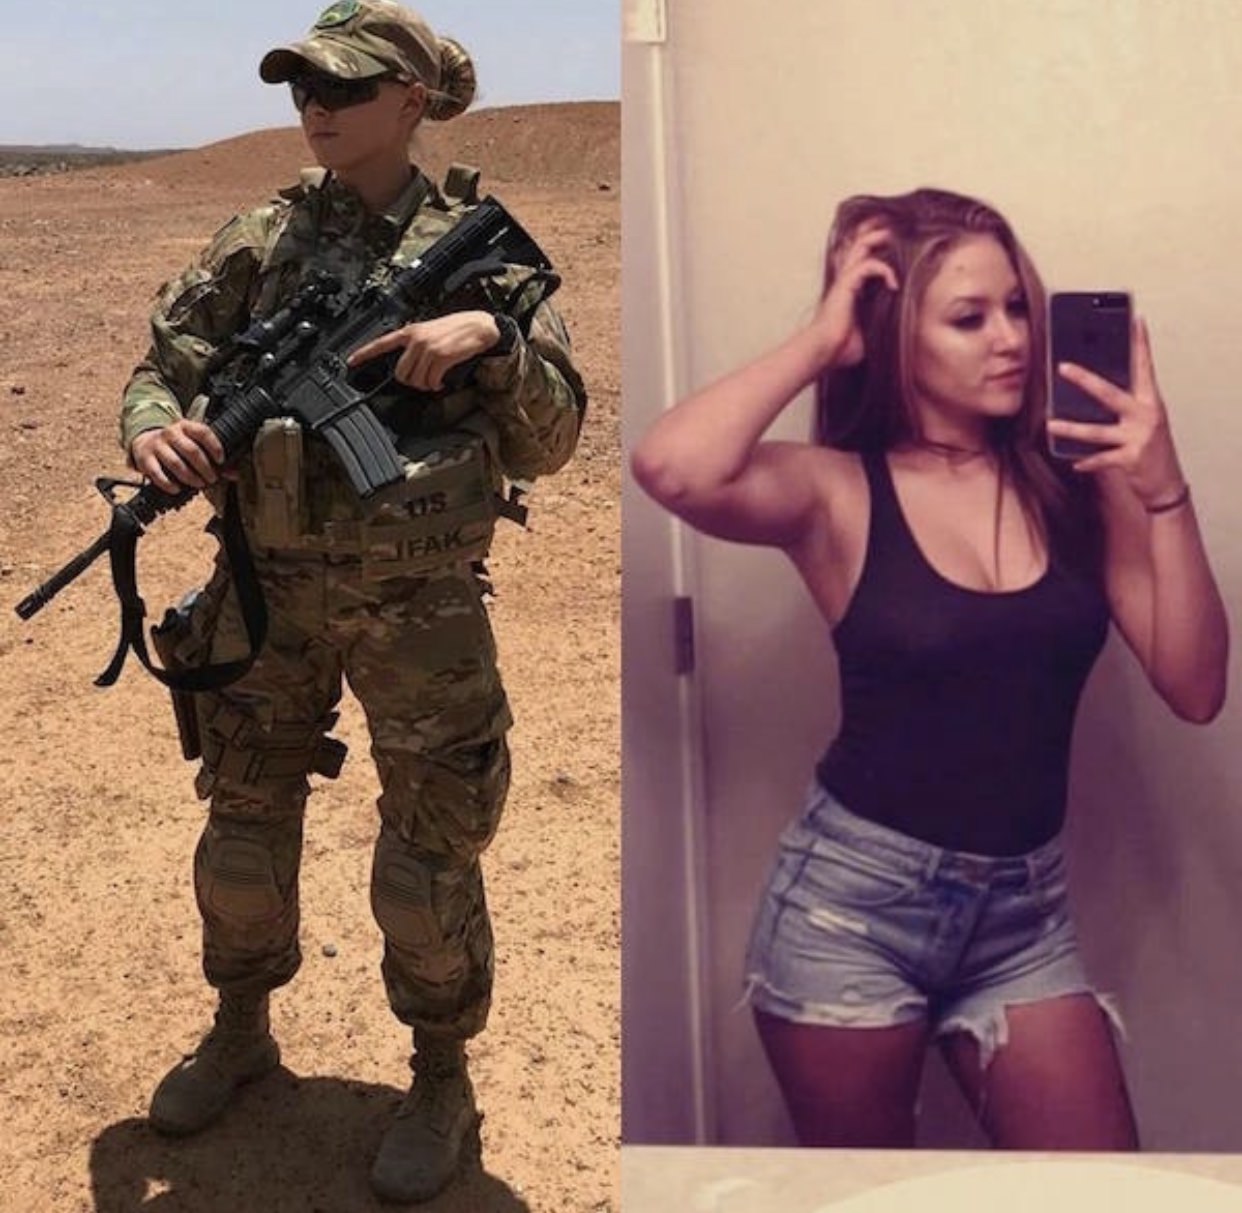 Hot military babe in uniform and assault rifle and a picture of her taking a selfie with short jeans shorts and a booby tanktop 